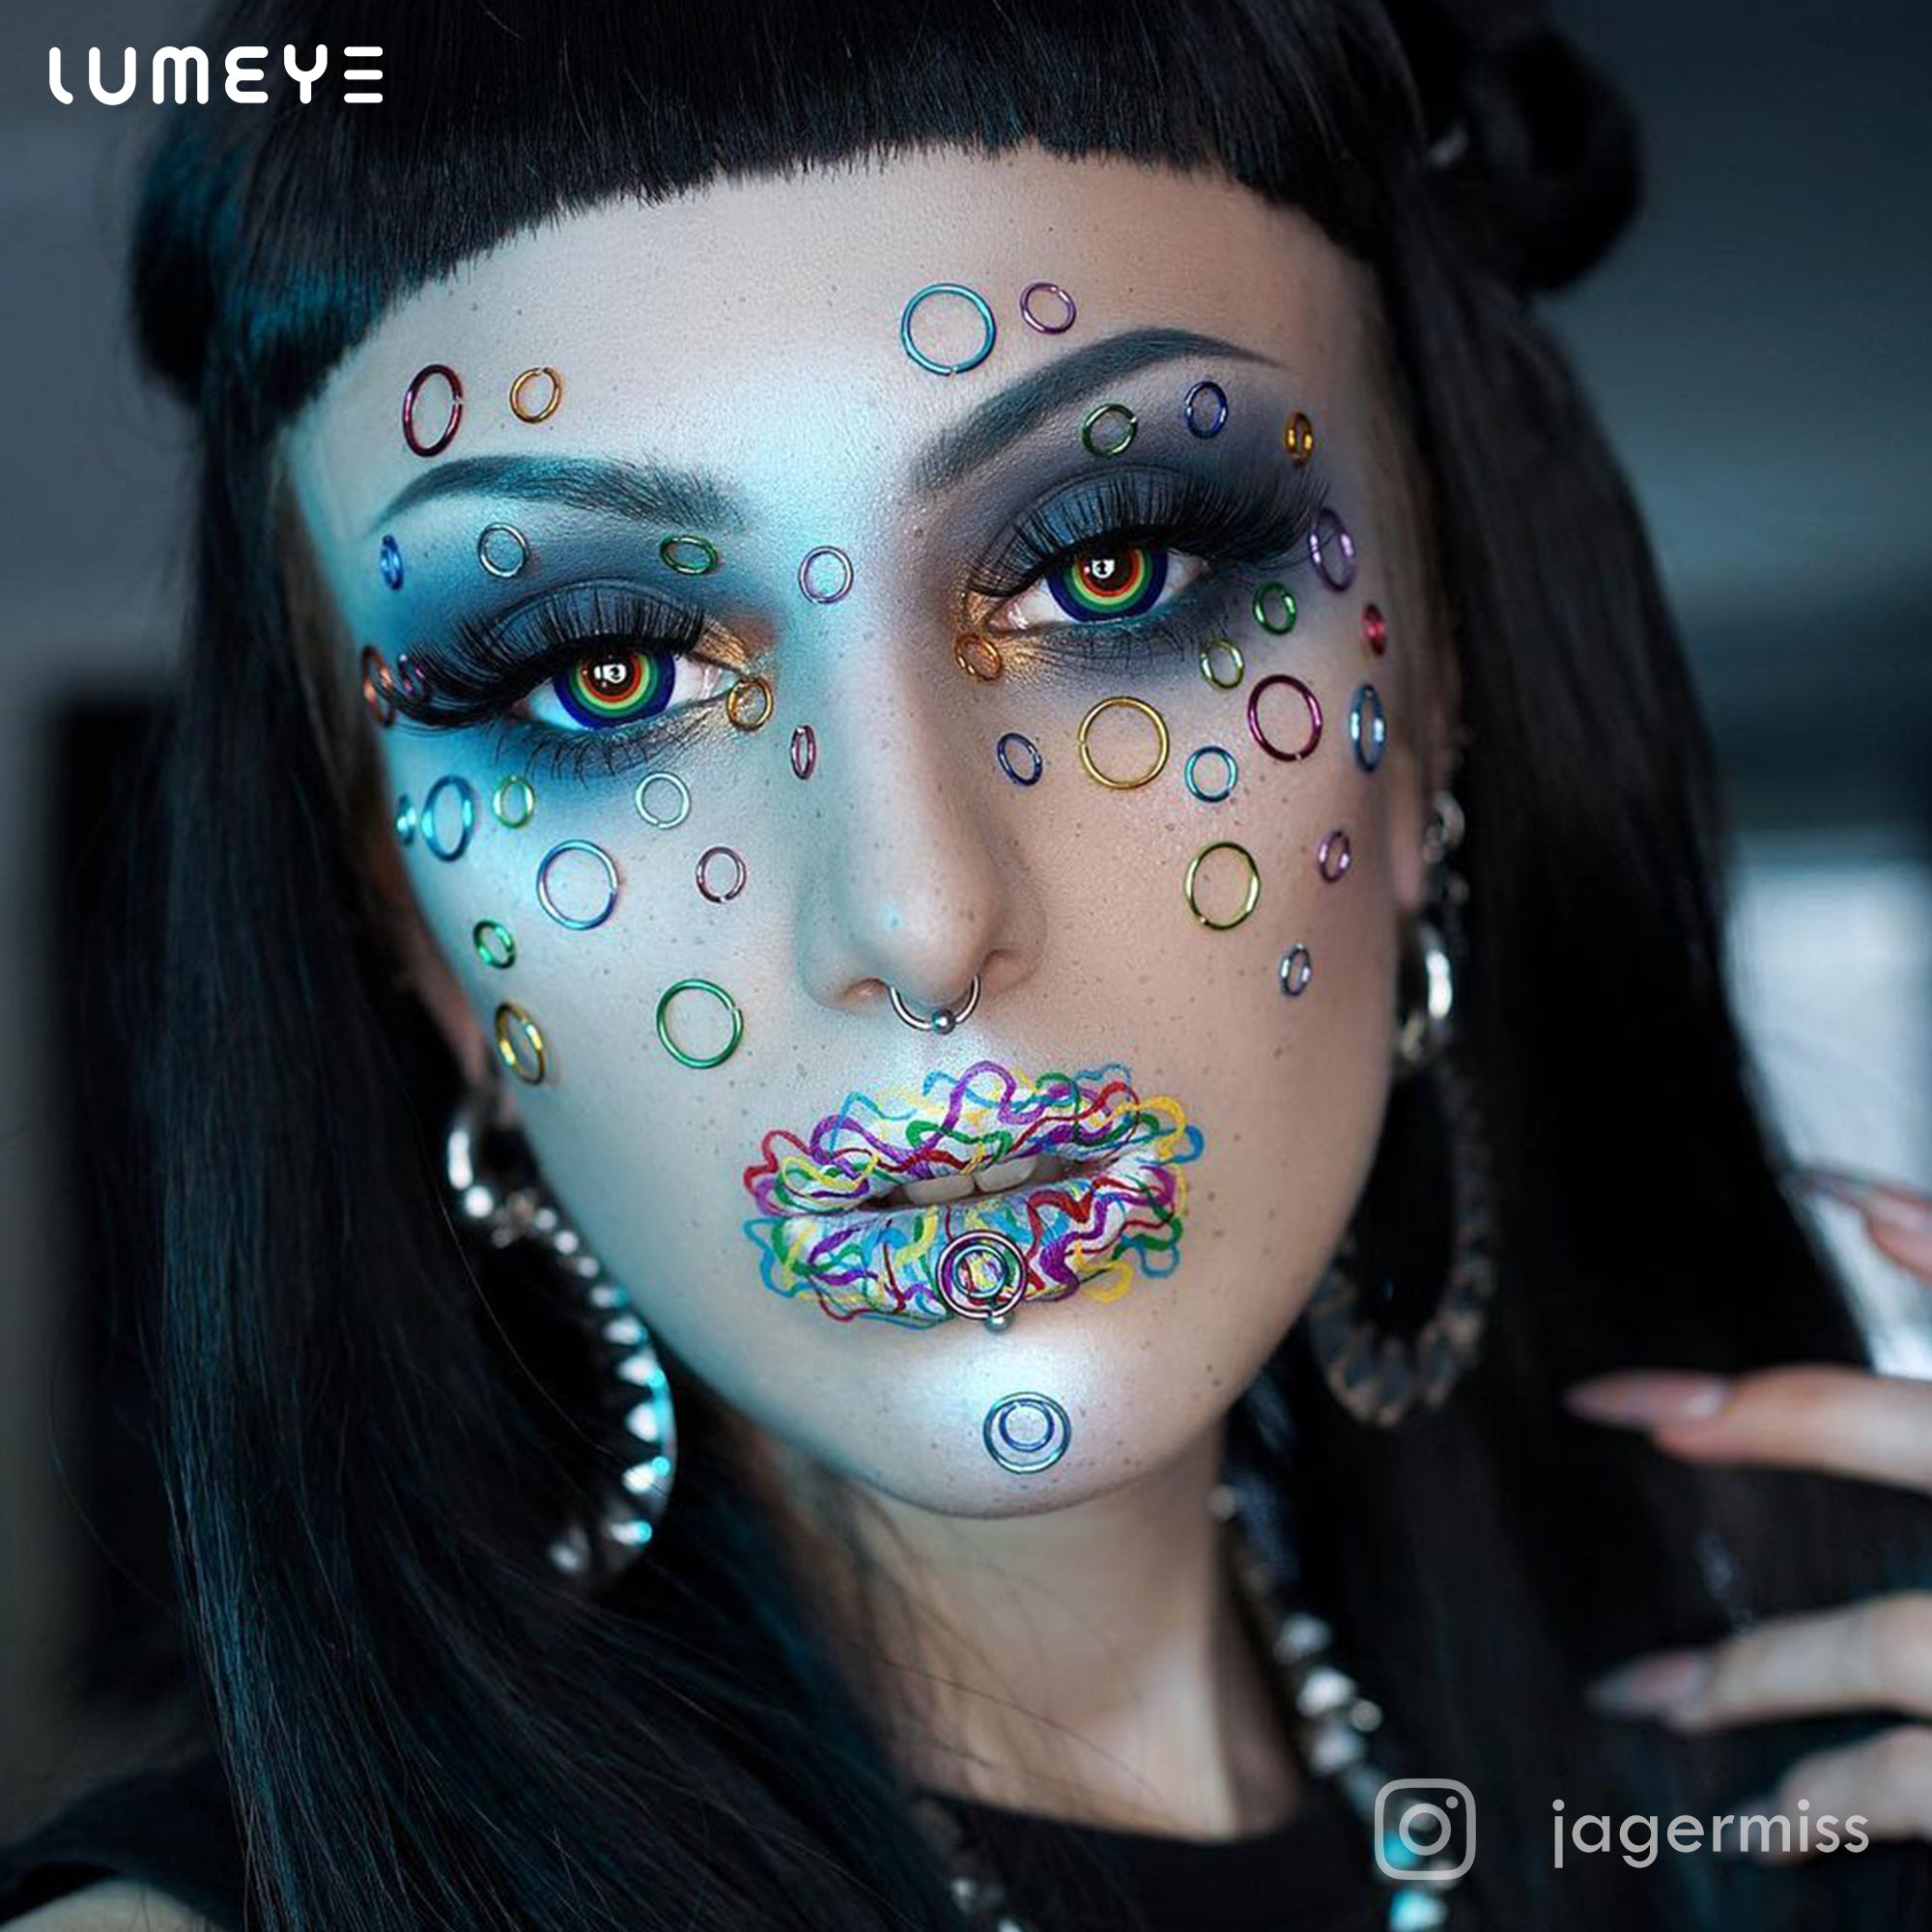 Best COLORED CONTACTS - LUMEYE Neon Light Colored Contact Lenses - LUMEYE